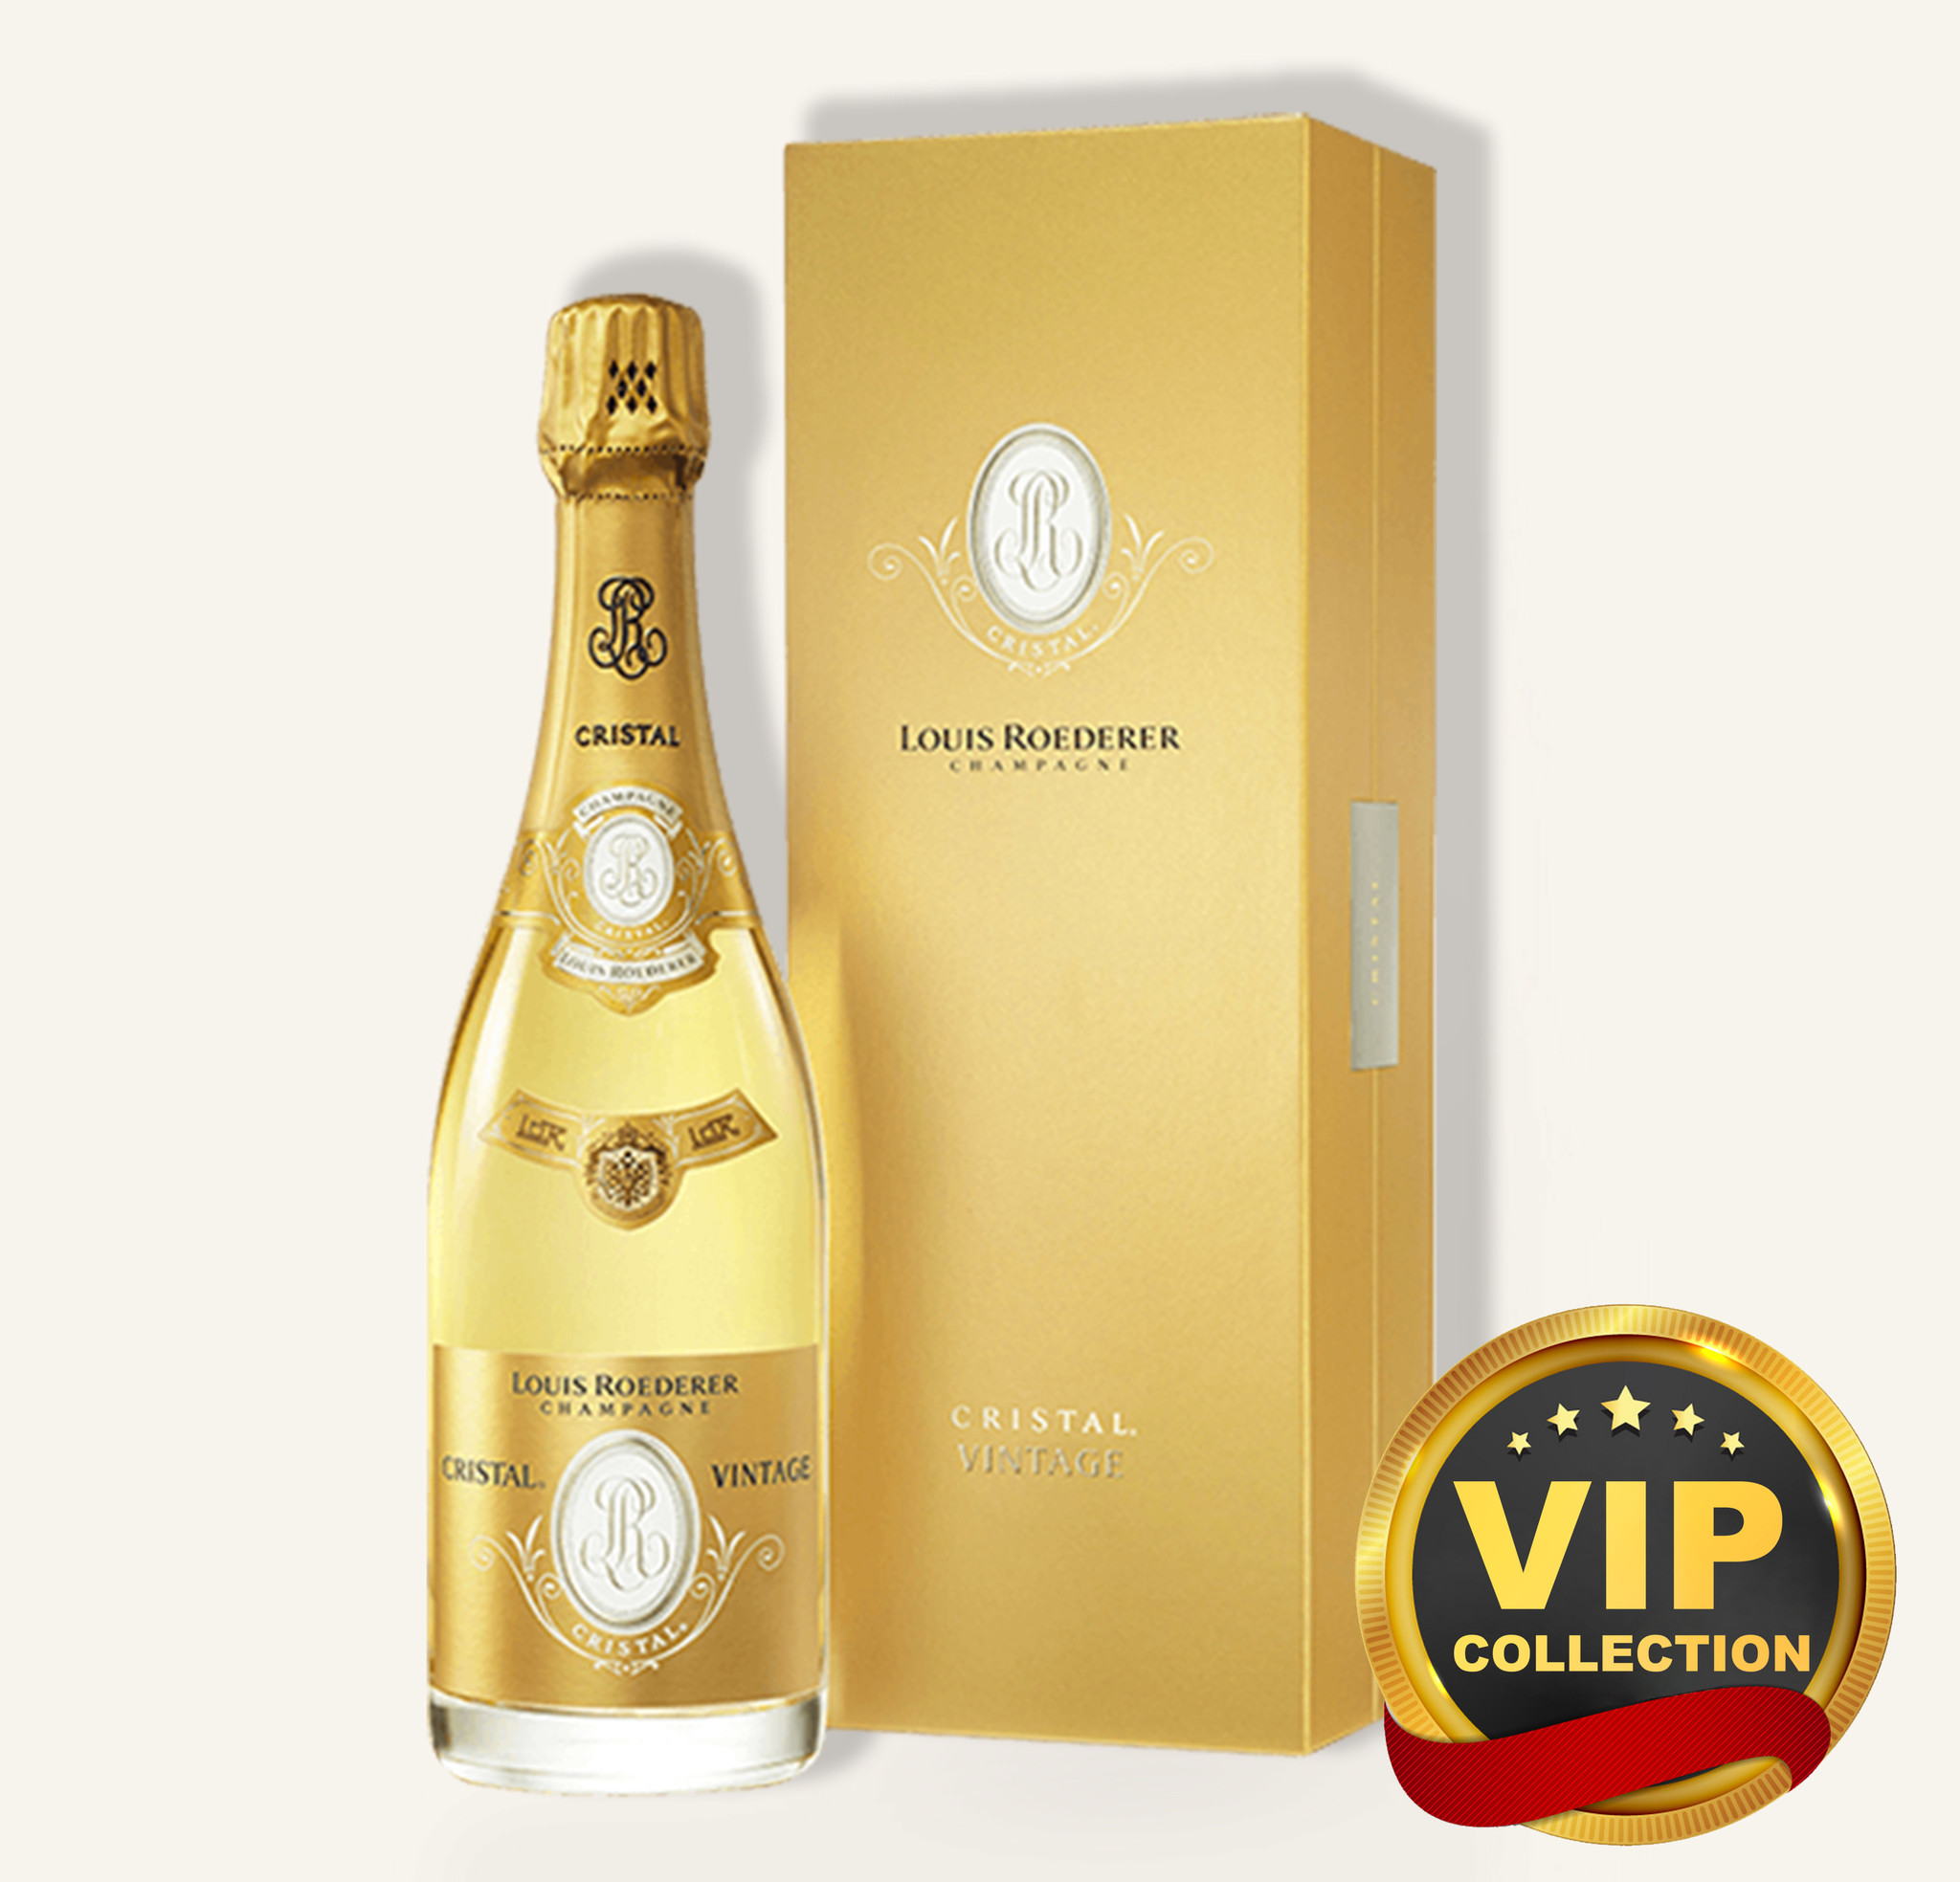 Louis Roederer Cristal Brut 2014 Champagne 750ml $328 FREE DELIVERY